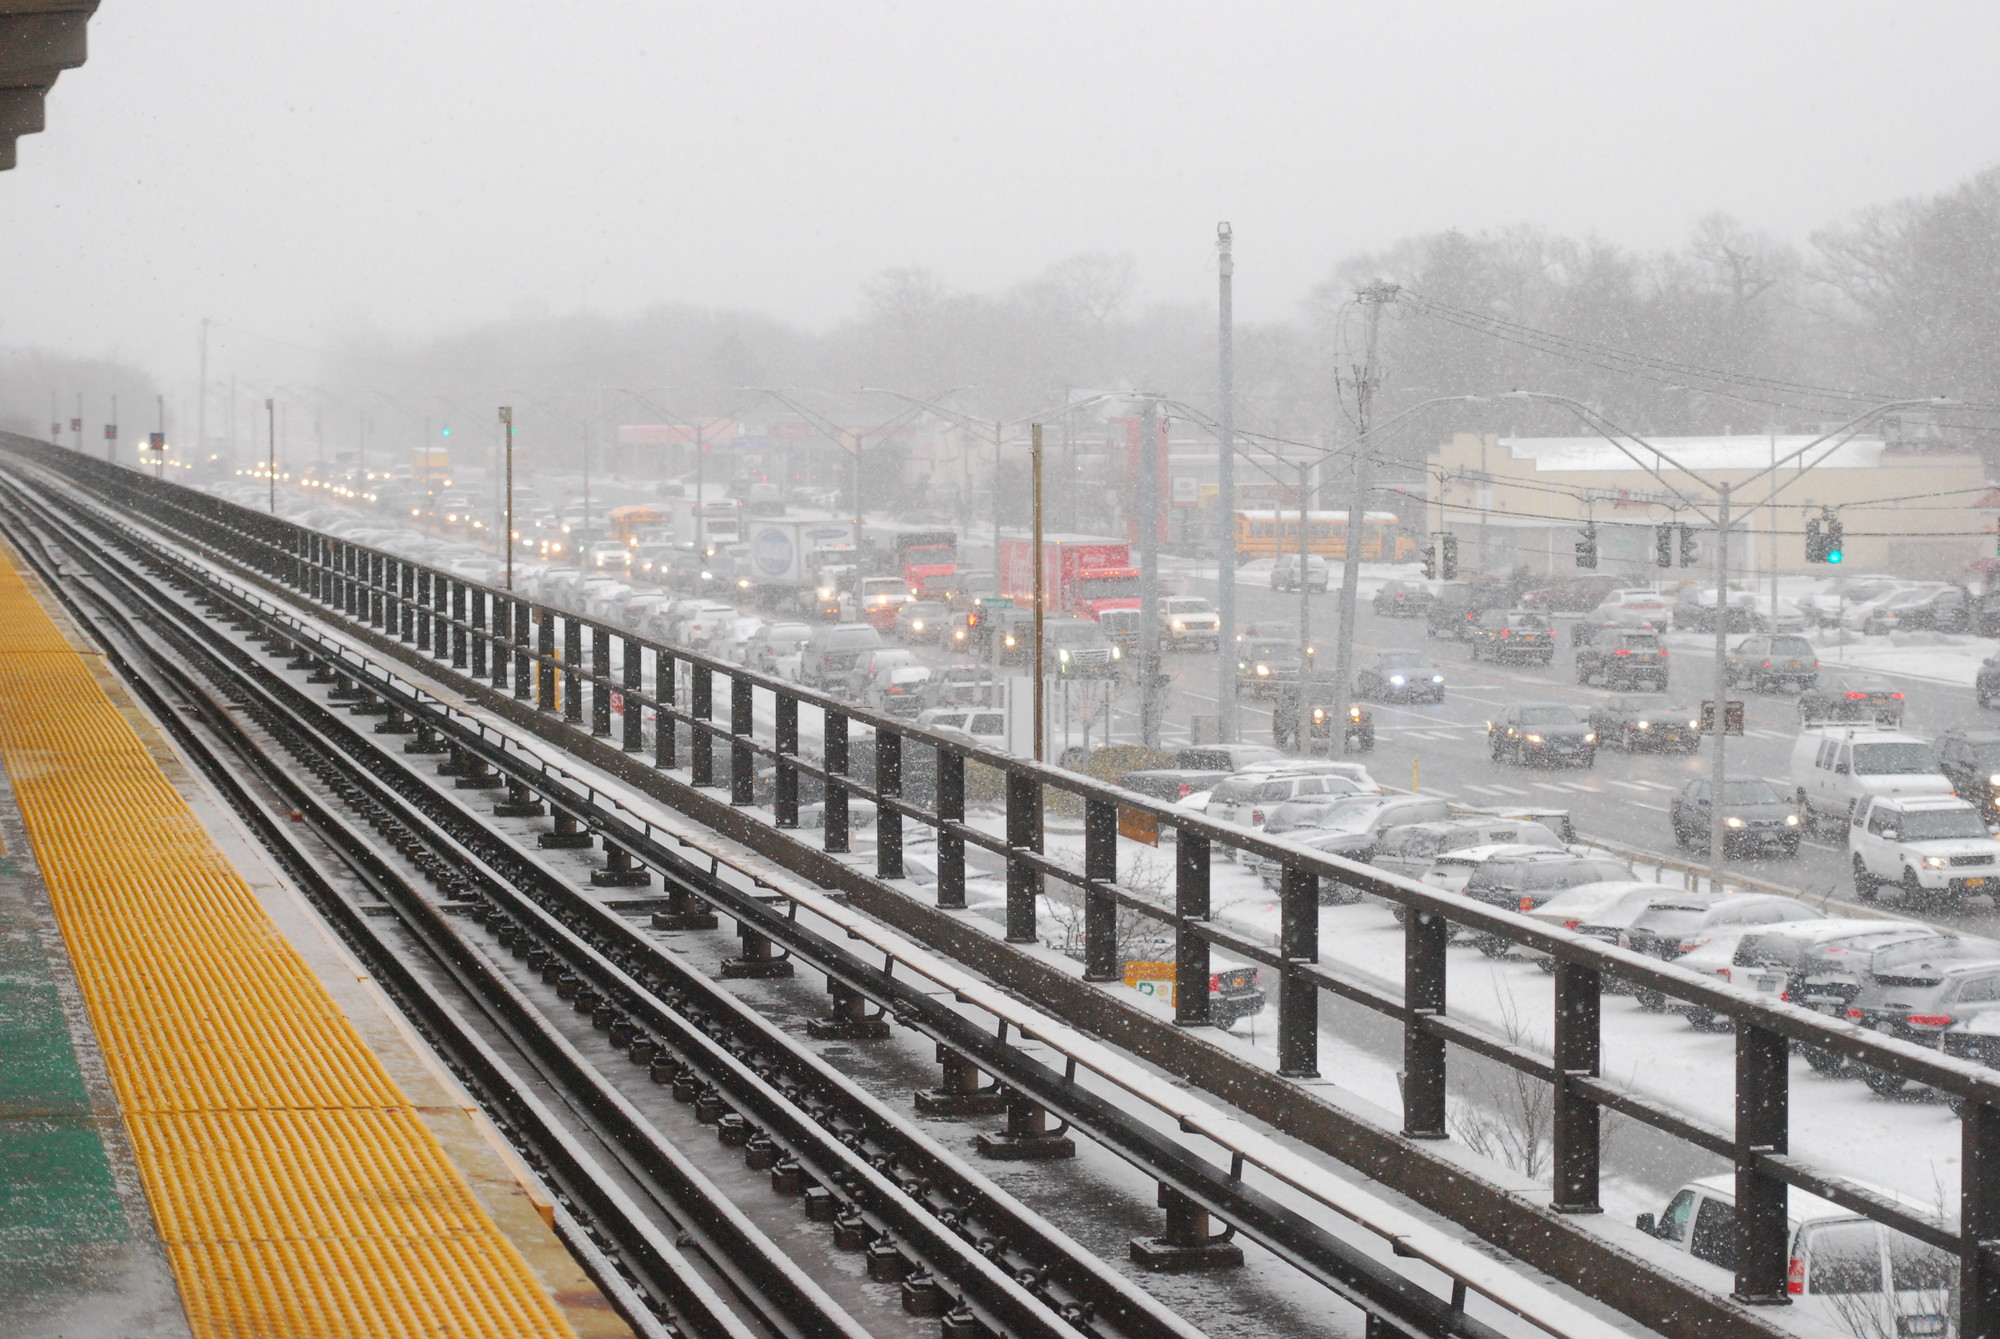 Traffic was backed up on Sunrise Highway through Bellmore-Merrick as the storm crept in.